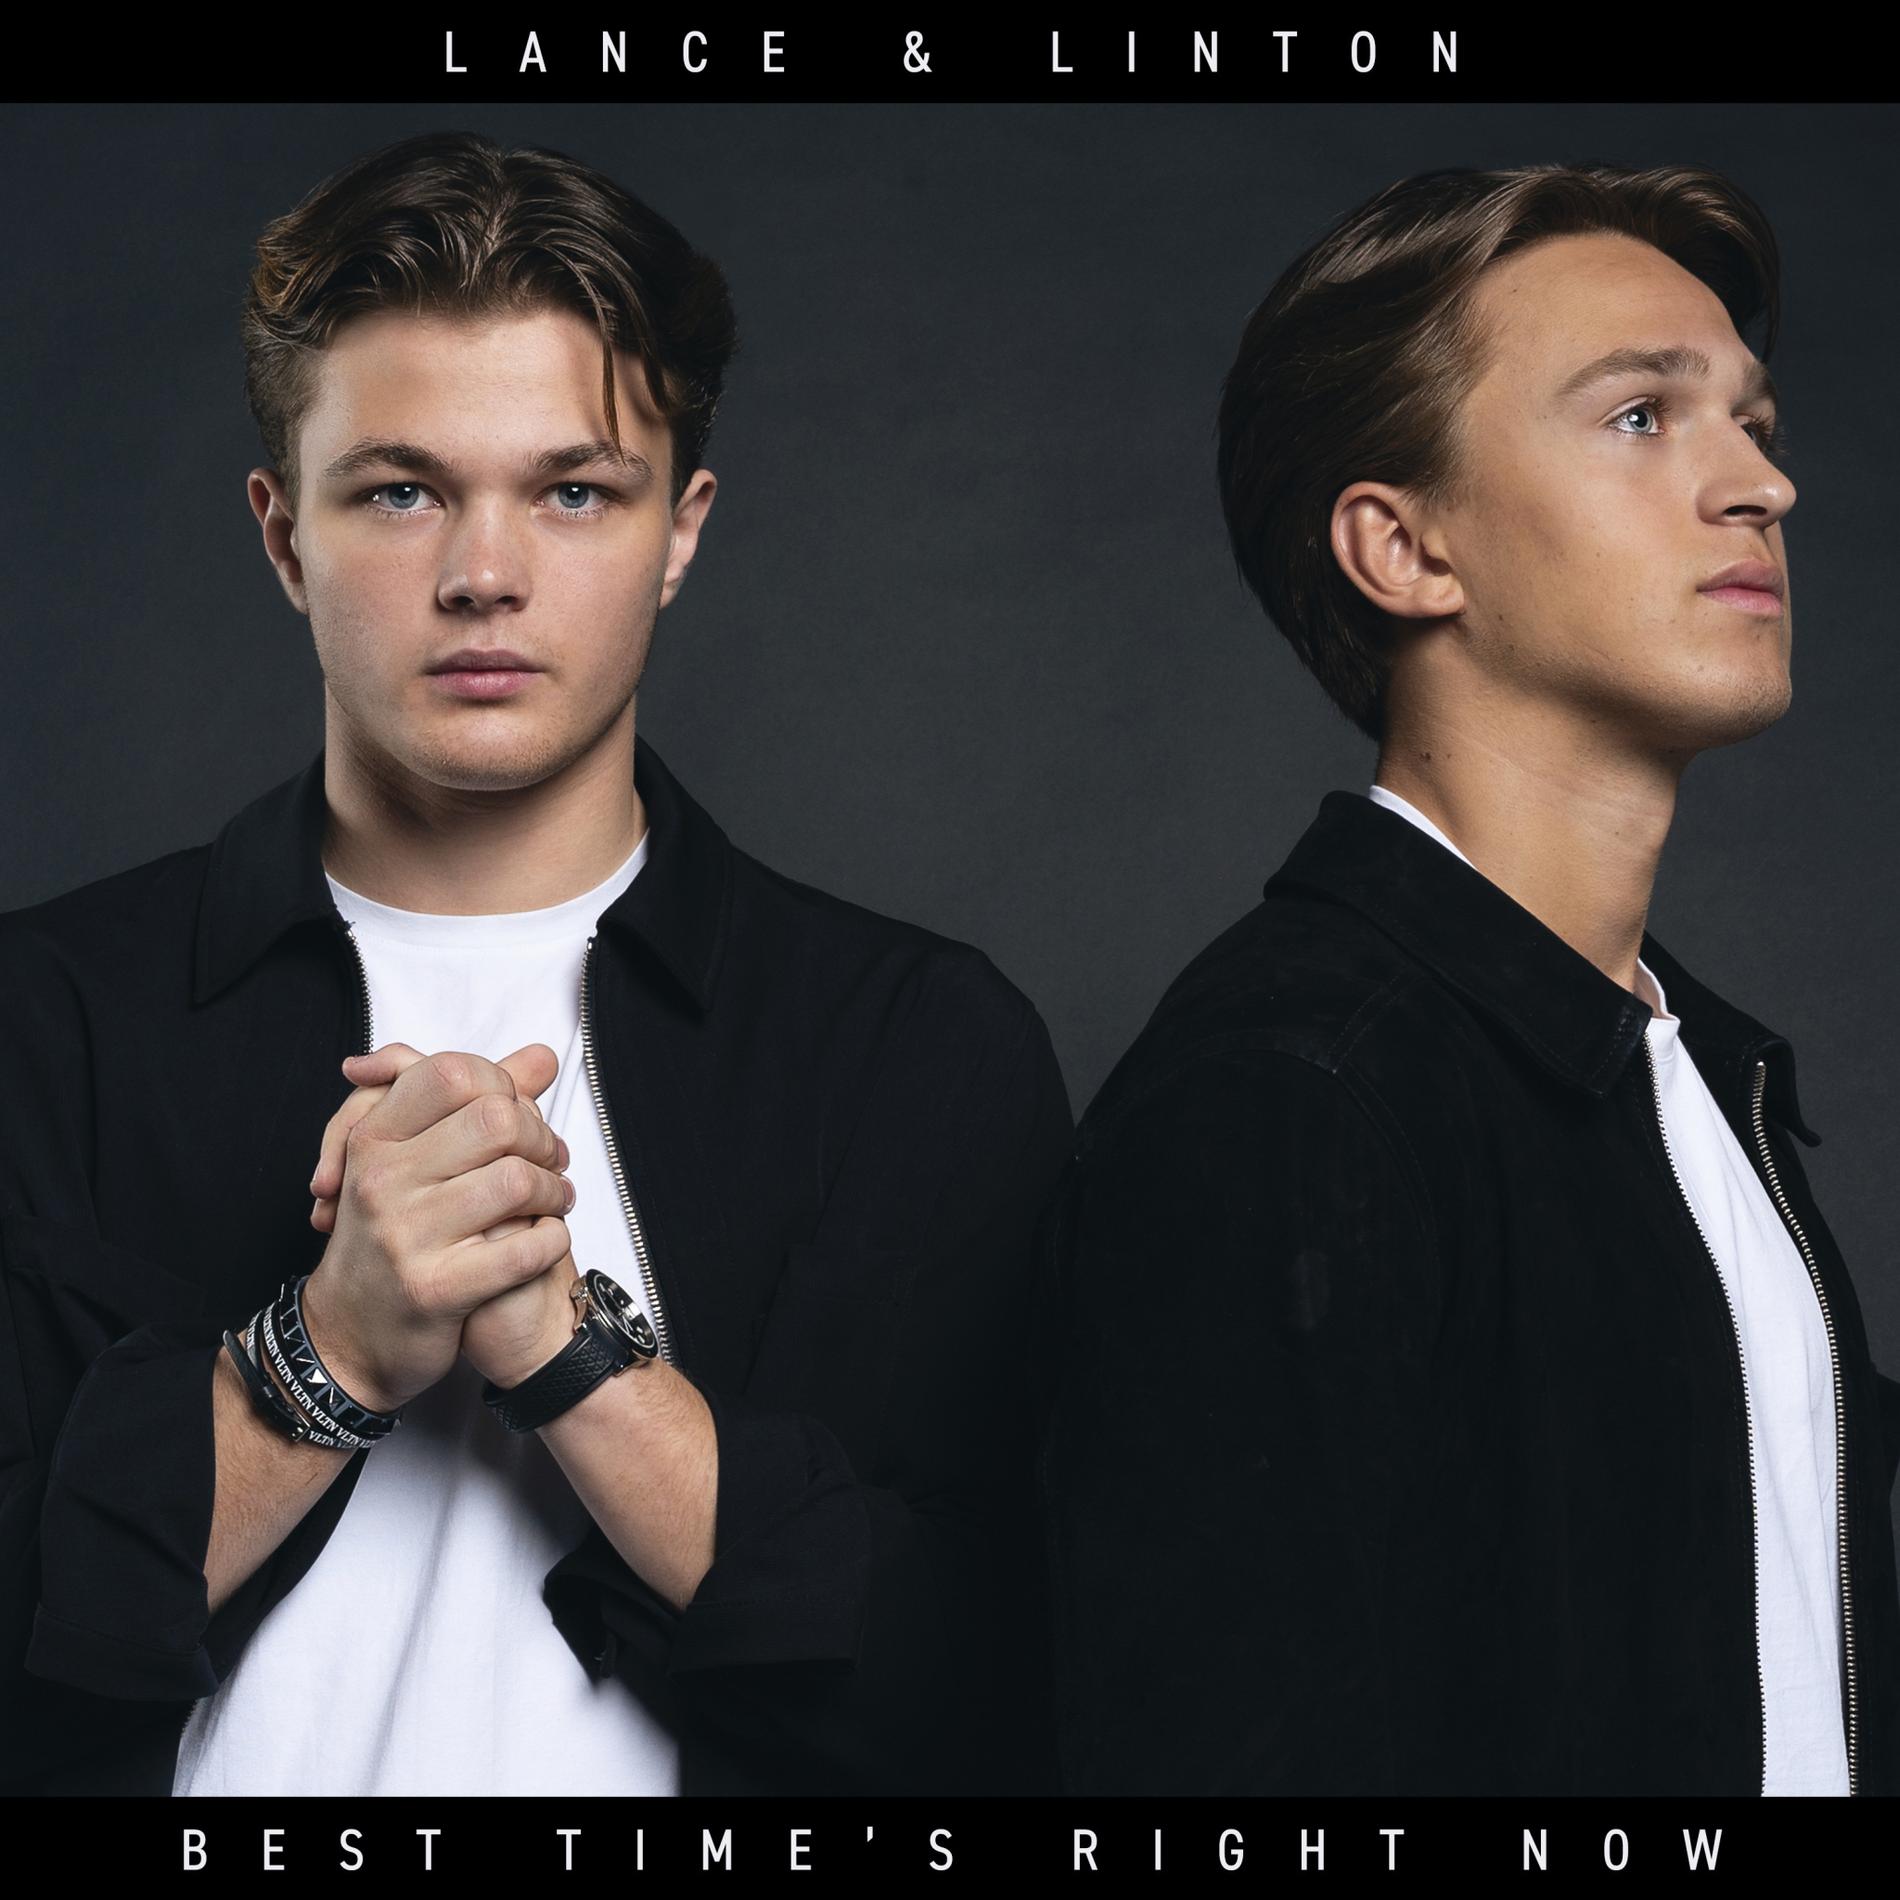 Lance & Lintons singel ”Best time’s right now”.